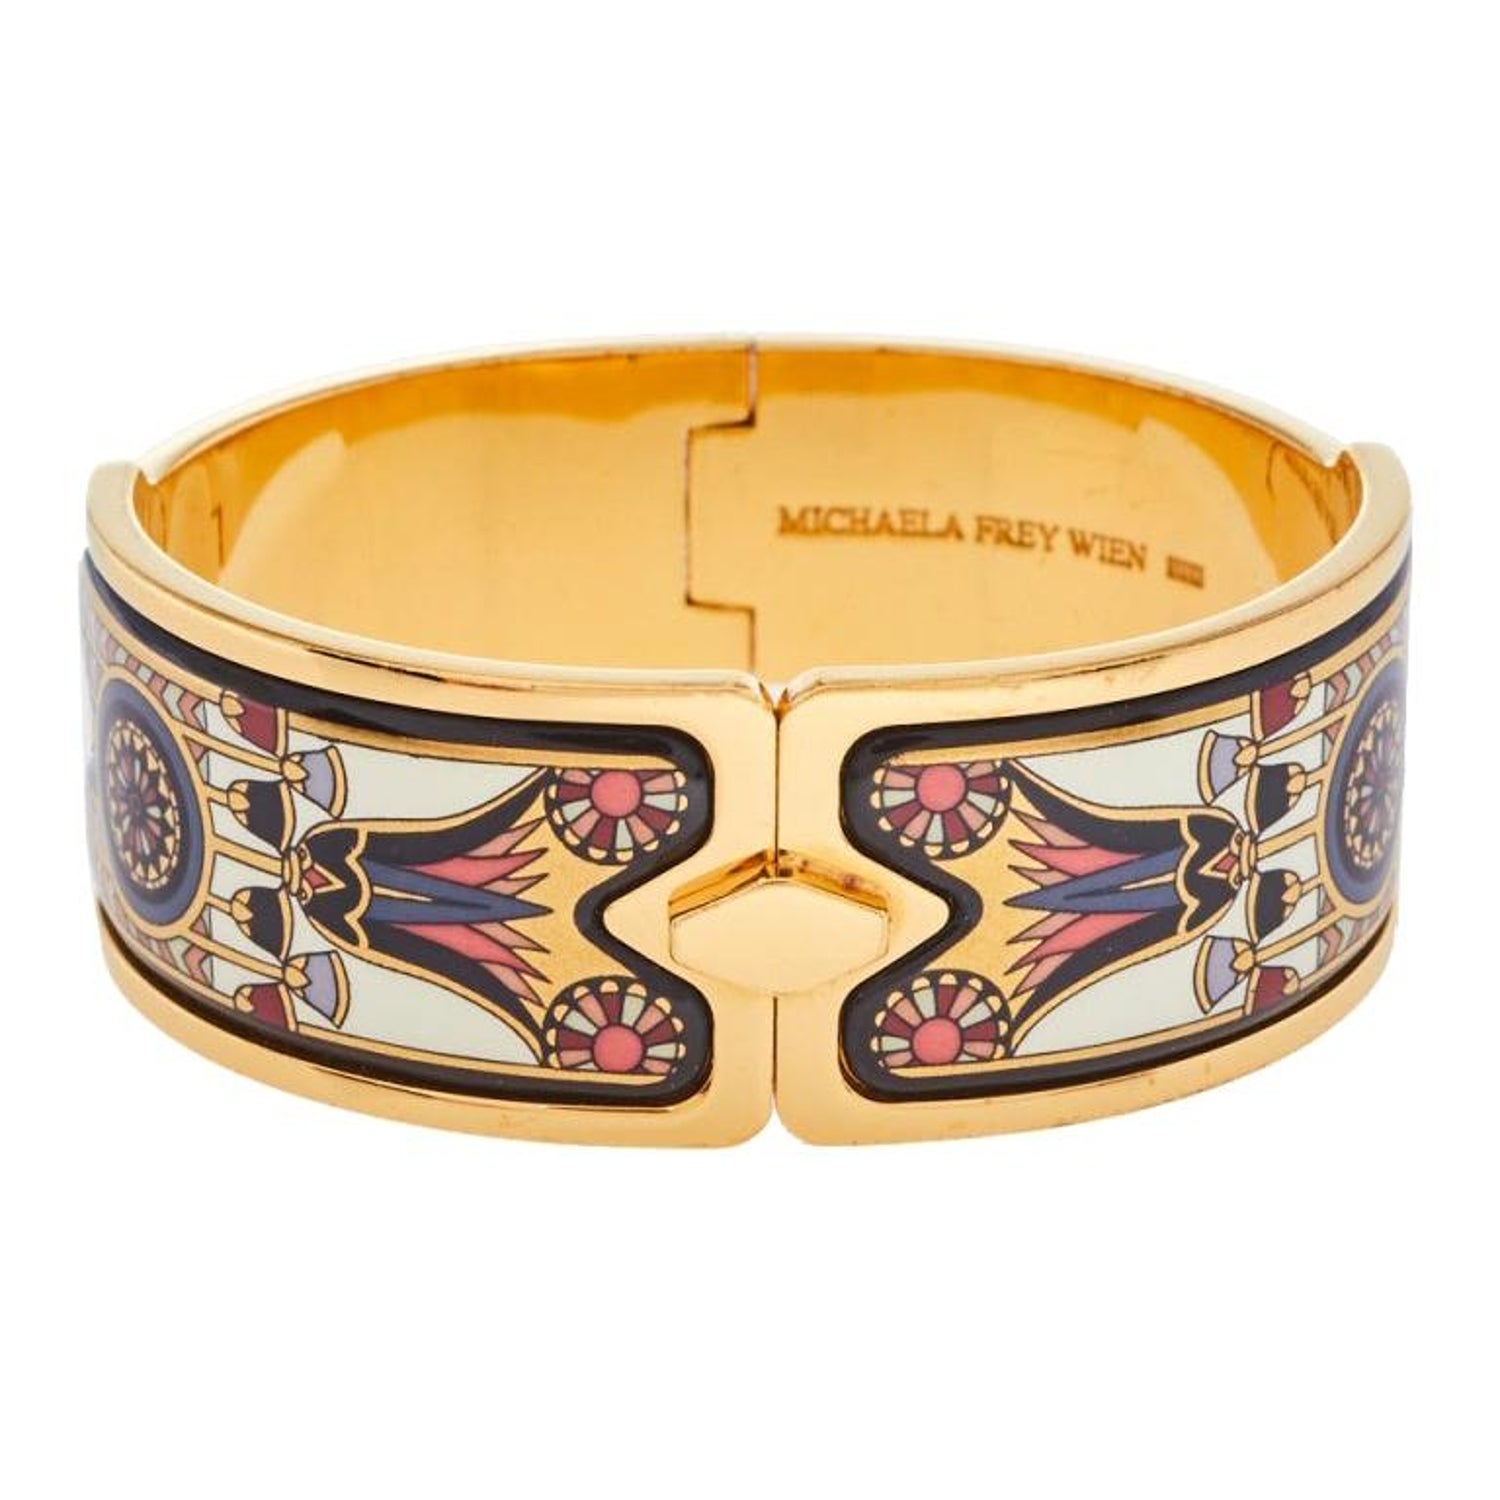 Frey Wille Jewellery - For Sale on 1stDibs | frey wille sale, frey wille  bangle, frey wille greece